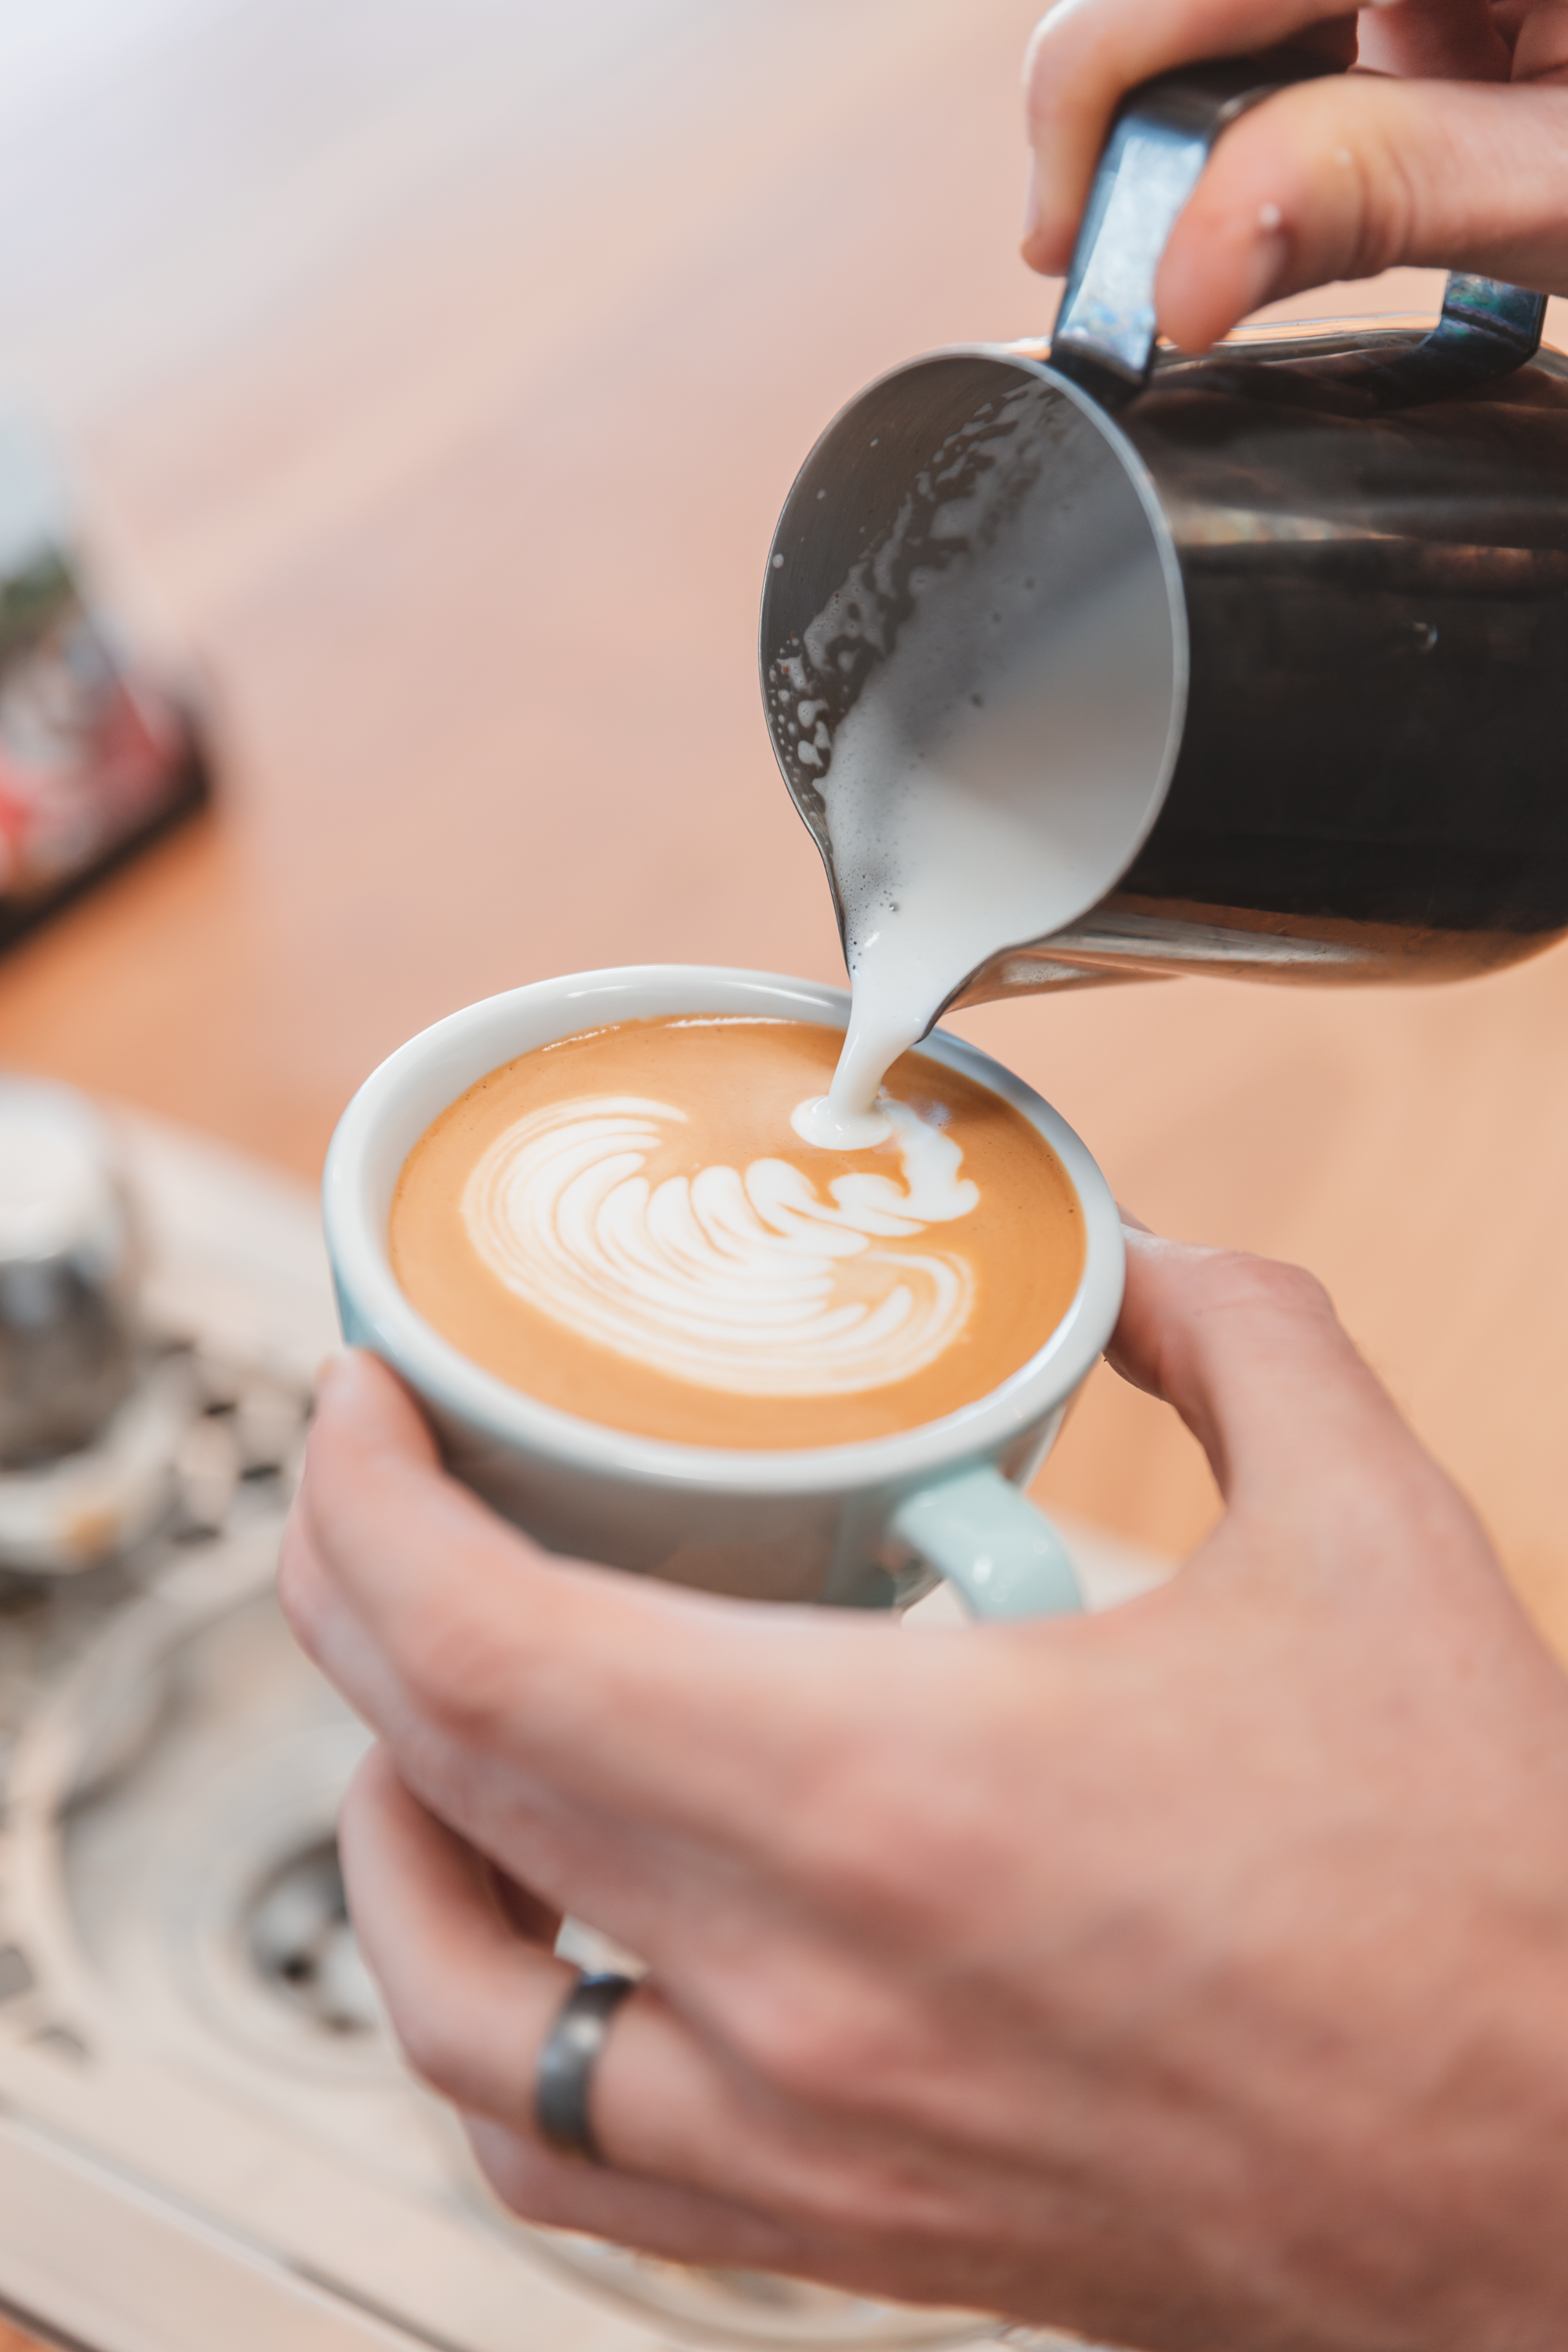 A hand holding a coffee cup and pouring milk into an artsy shape in the crema.